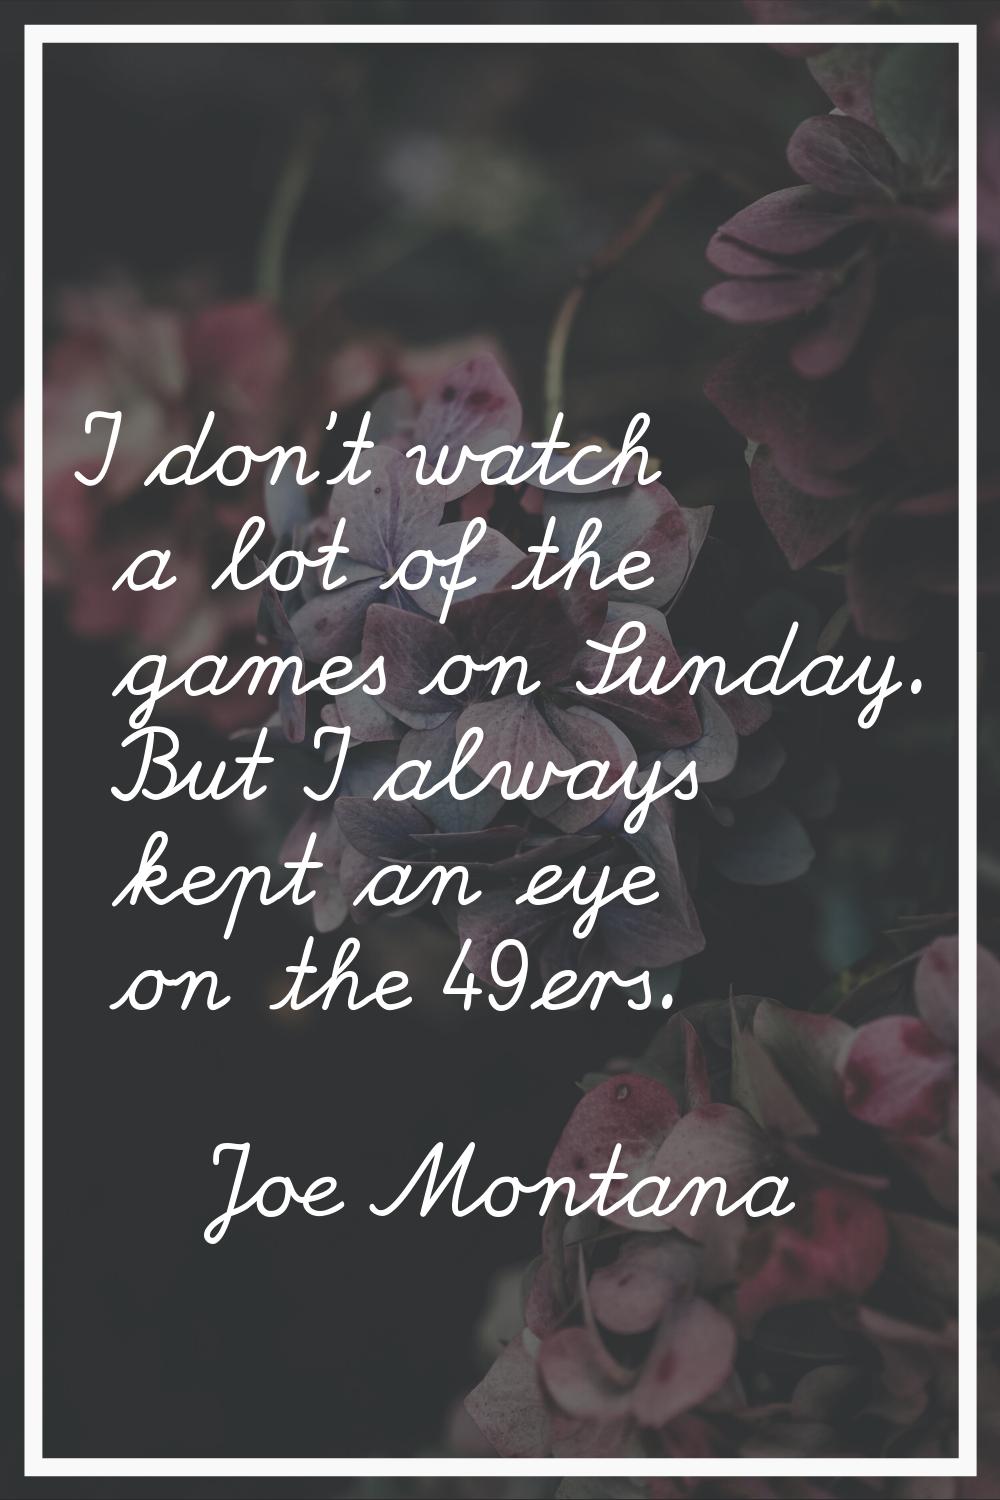 I don't watch a lot of the games on Sunday. But I always kept an eye on the 49ers.